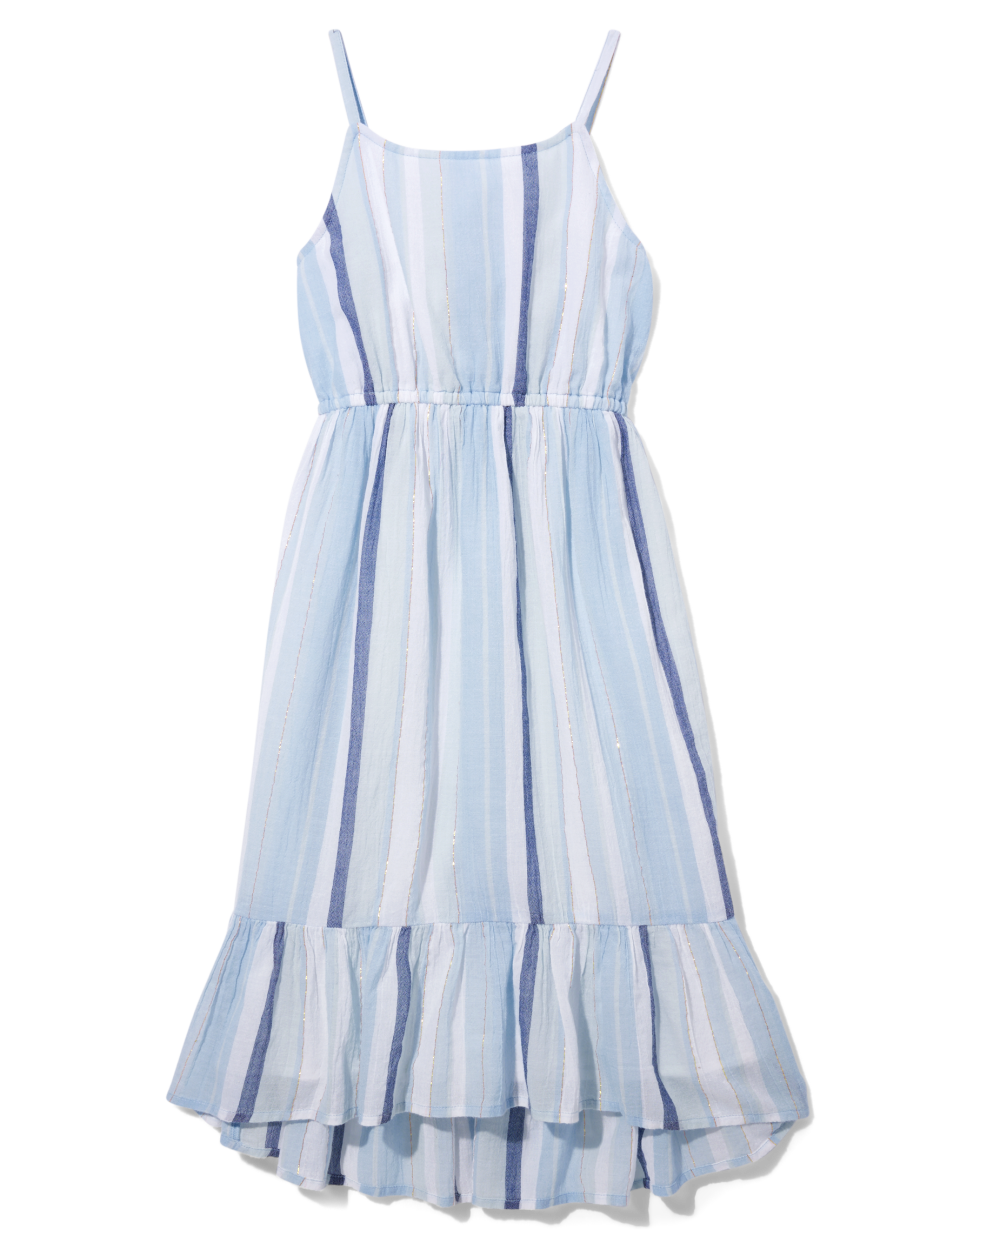 Girls Sleeveless Spaghetti Strap Striped Print Tiered Above the Knee Round Neck Smocked Dress With Ruffles